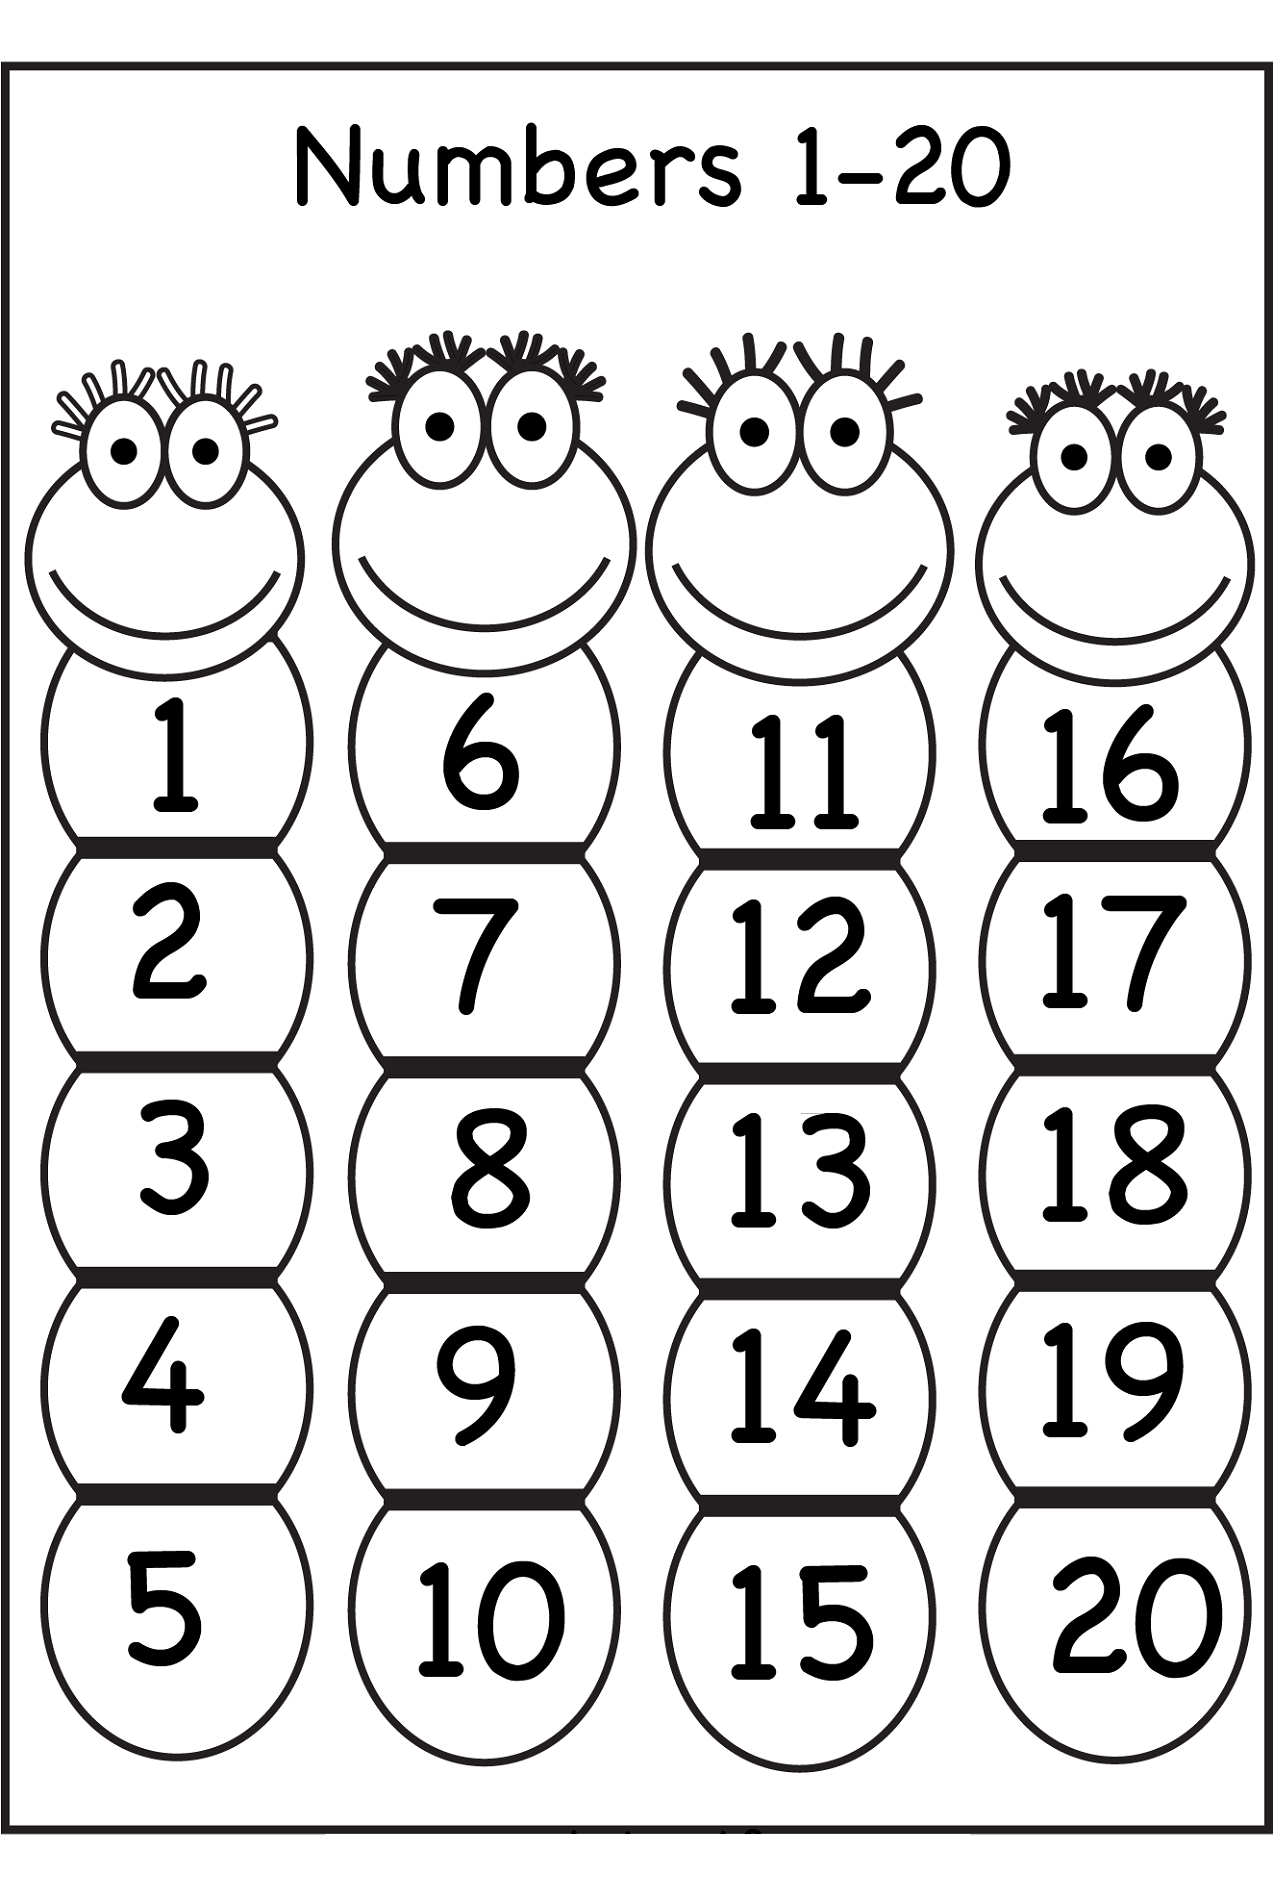 counting-to-20-worksheet-year-1-countingworksheets